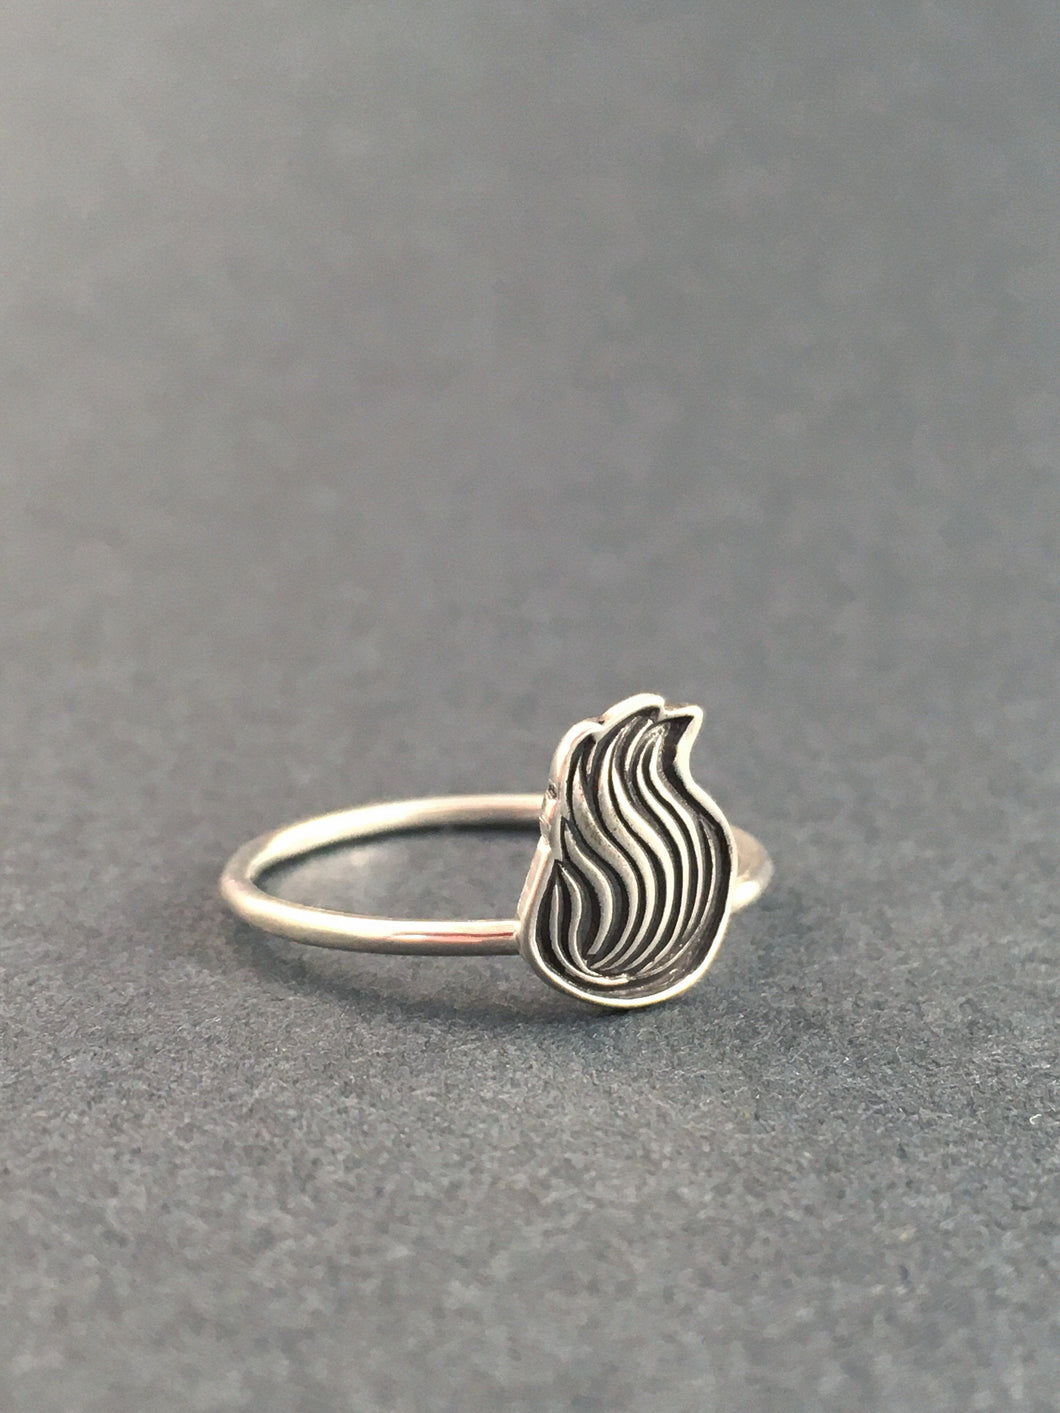 Flame sterling silver ring